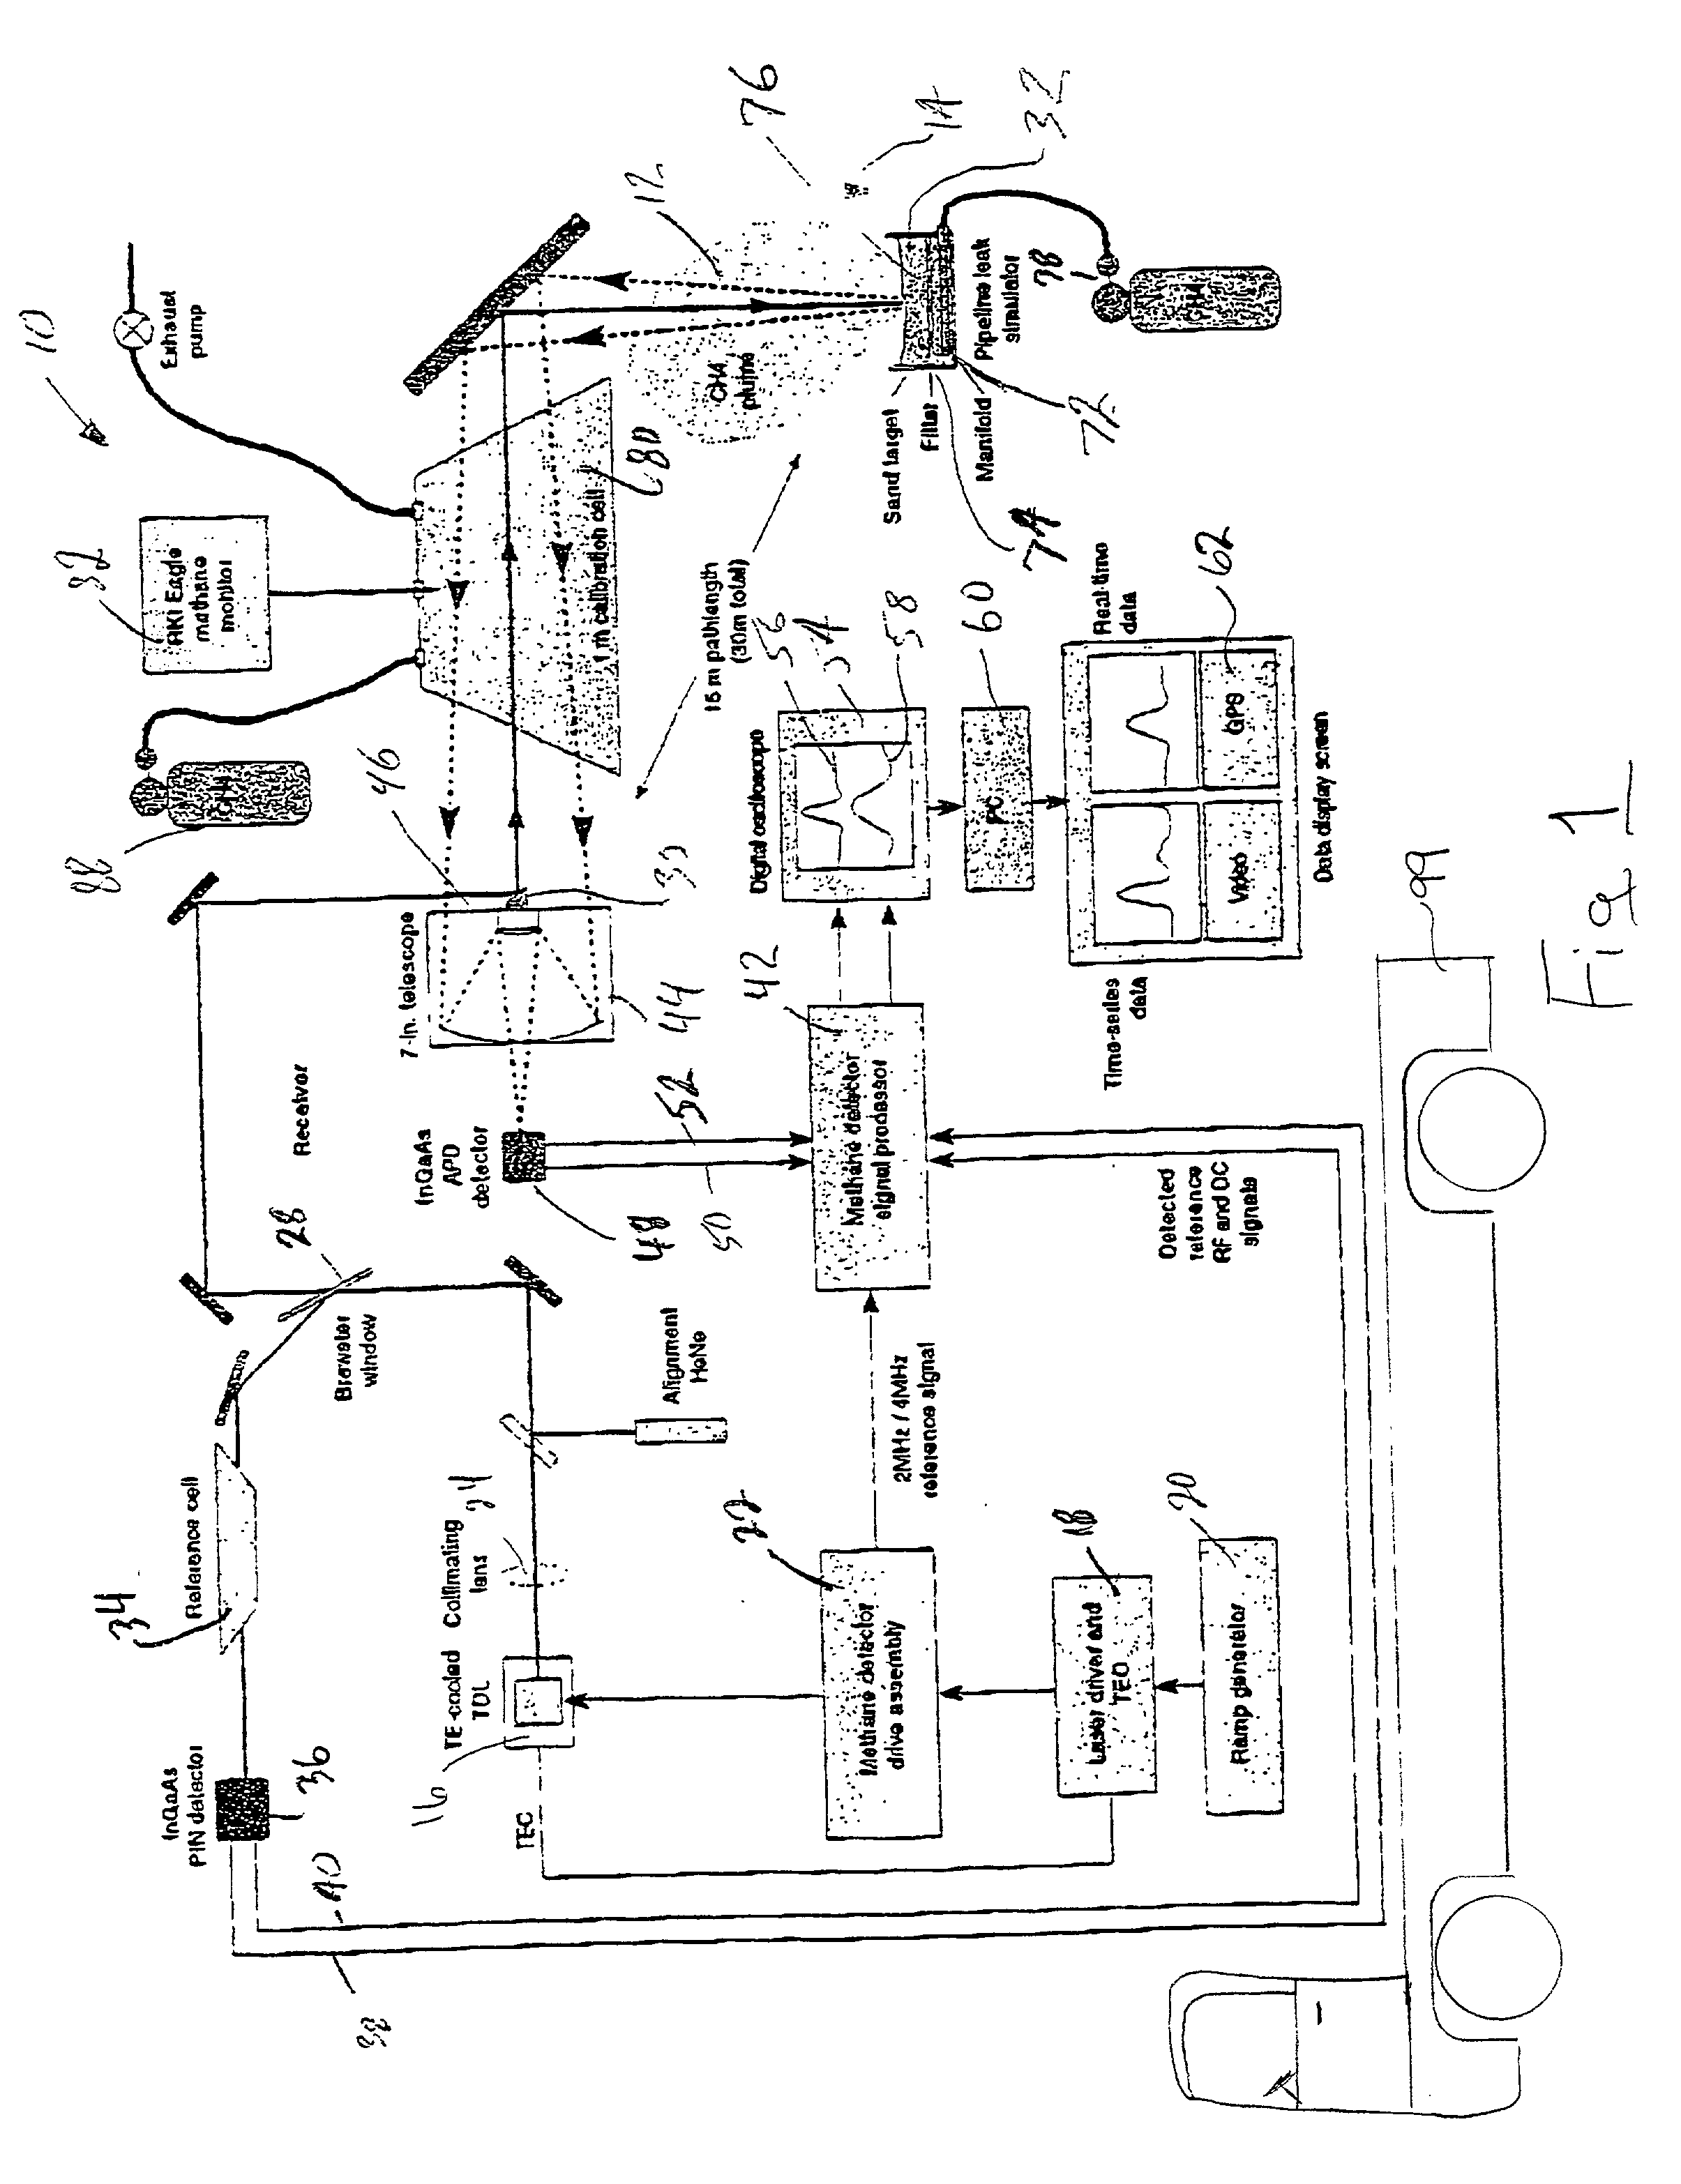 Apparatus and method of remote gas trace detection